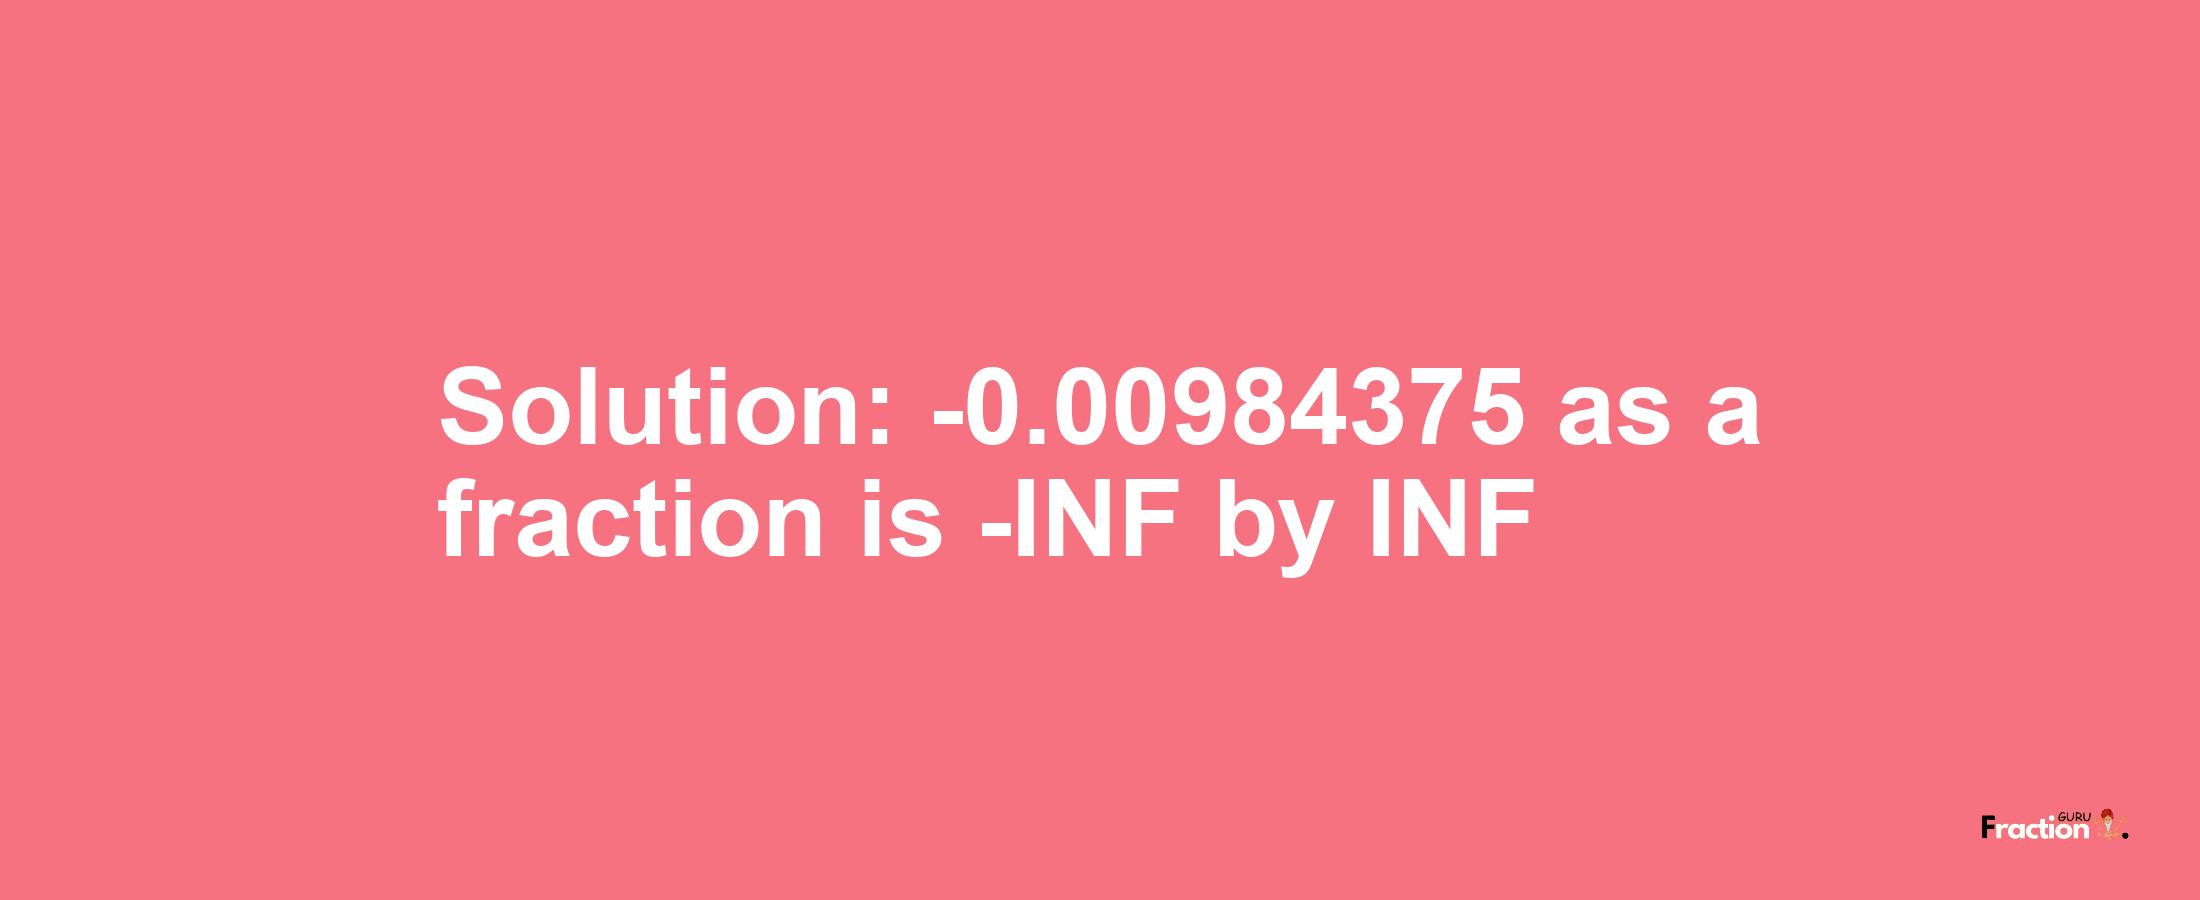 Solution:-0.00984375 as a fraction is -INF/INF